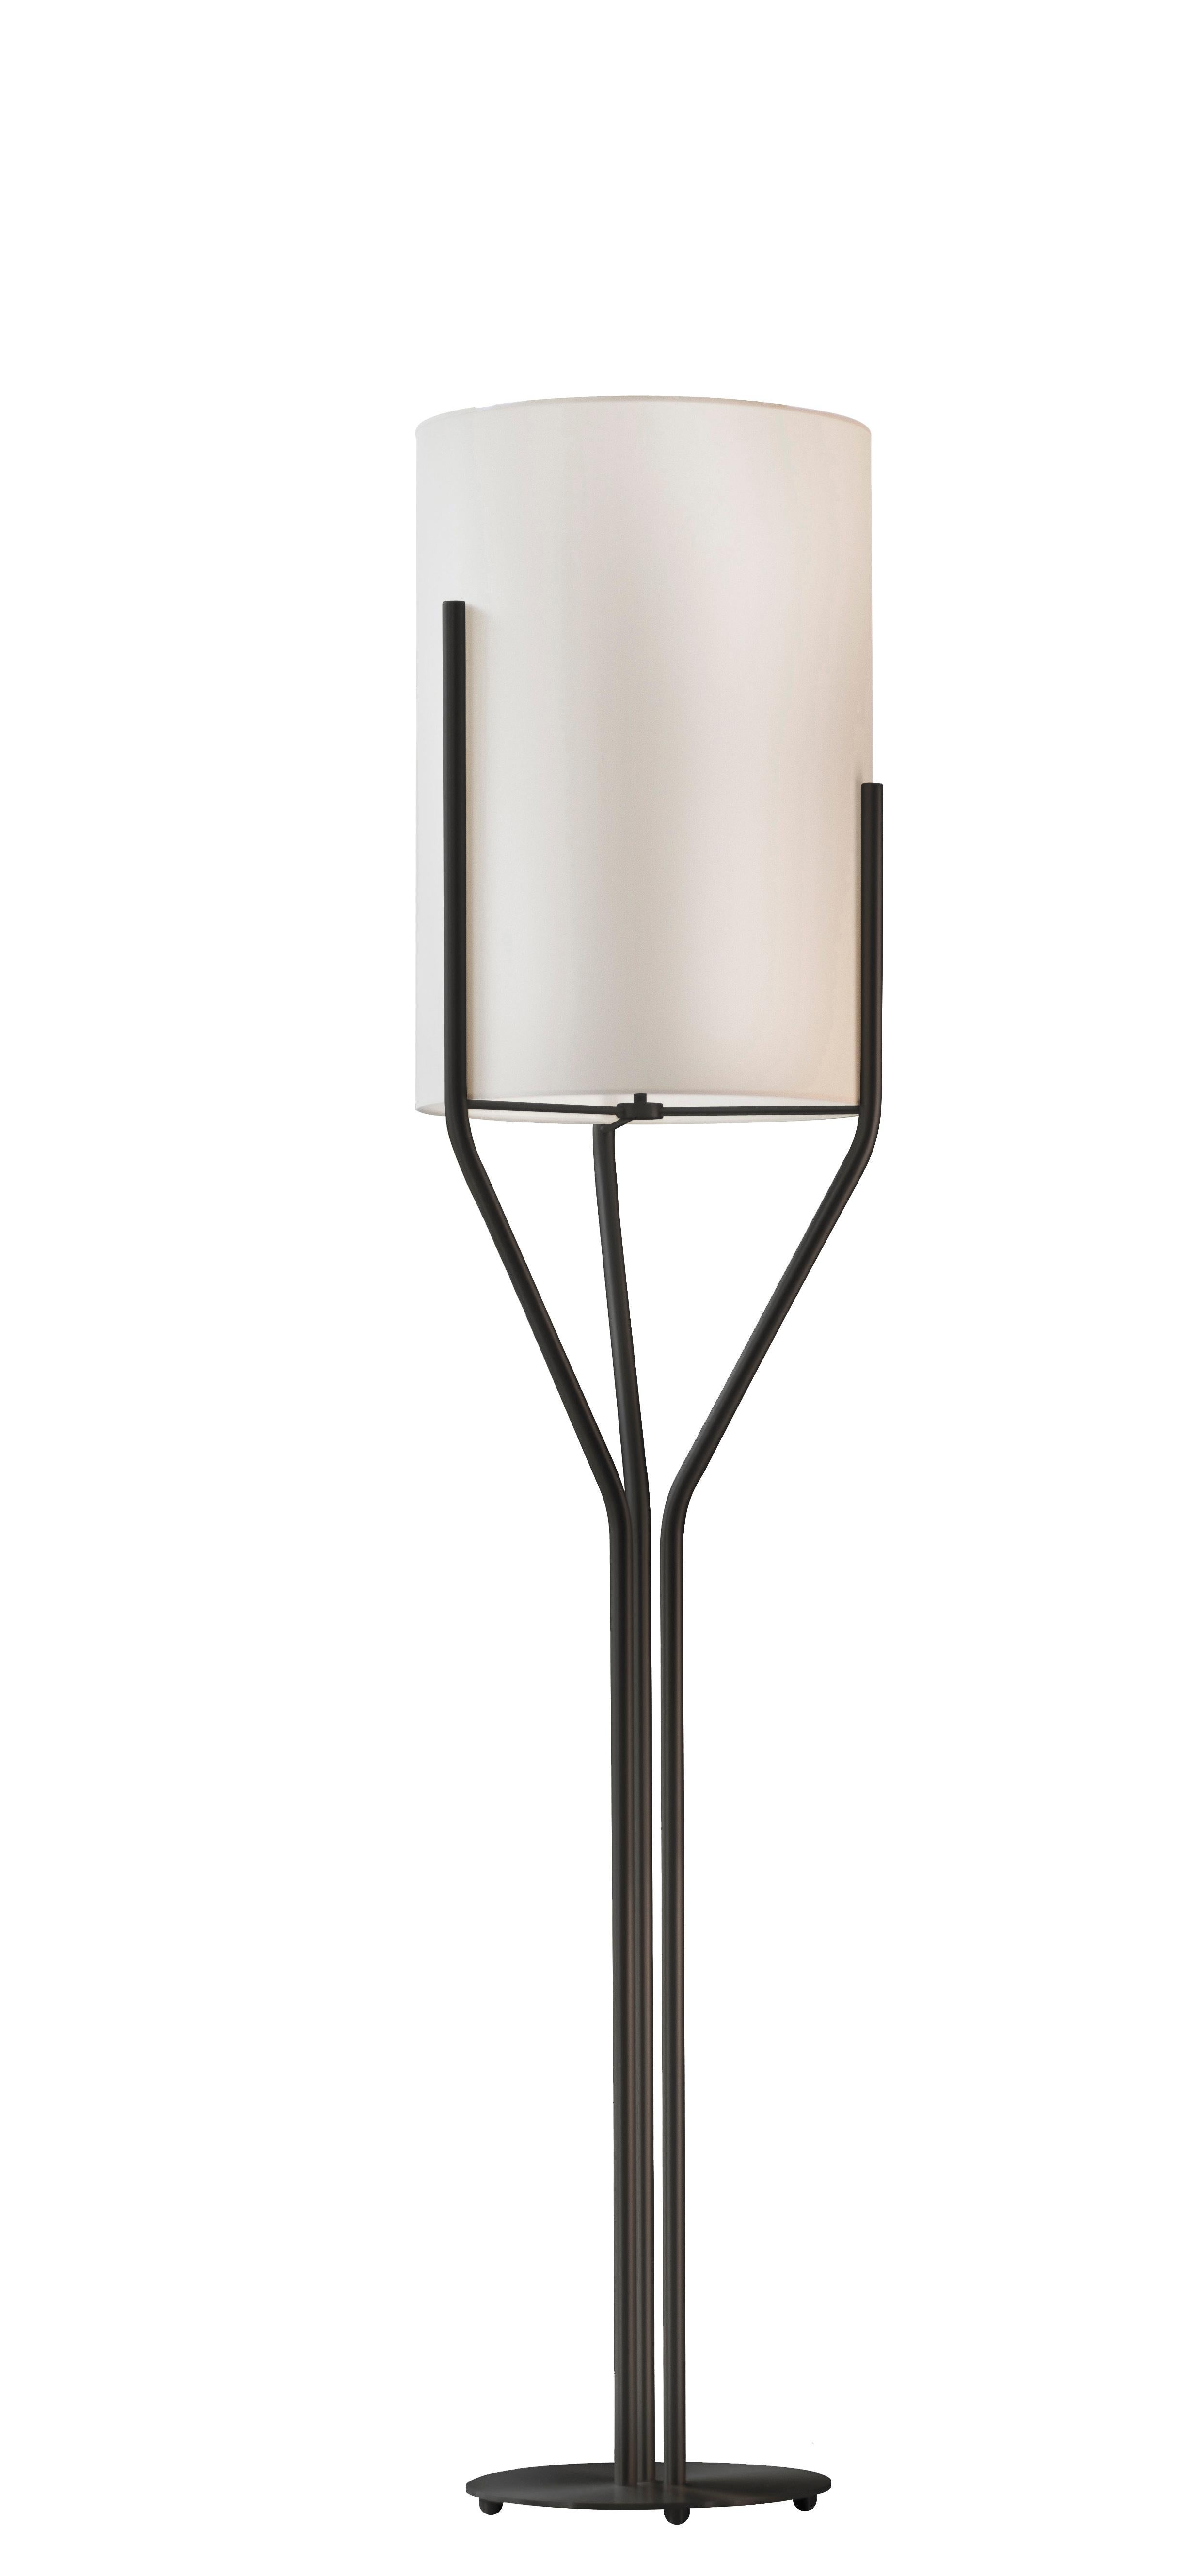 Arborescence XL satin graphite floor lamp by Hervé Langlais
Dimensions: D 40 x H 180 cm
Materials: Solid brass, lampshade drop paper® M1, black textile cable (2m).
Others finishes and dimensions are available.

All our lamps can be wired